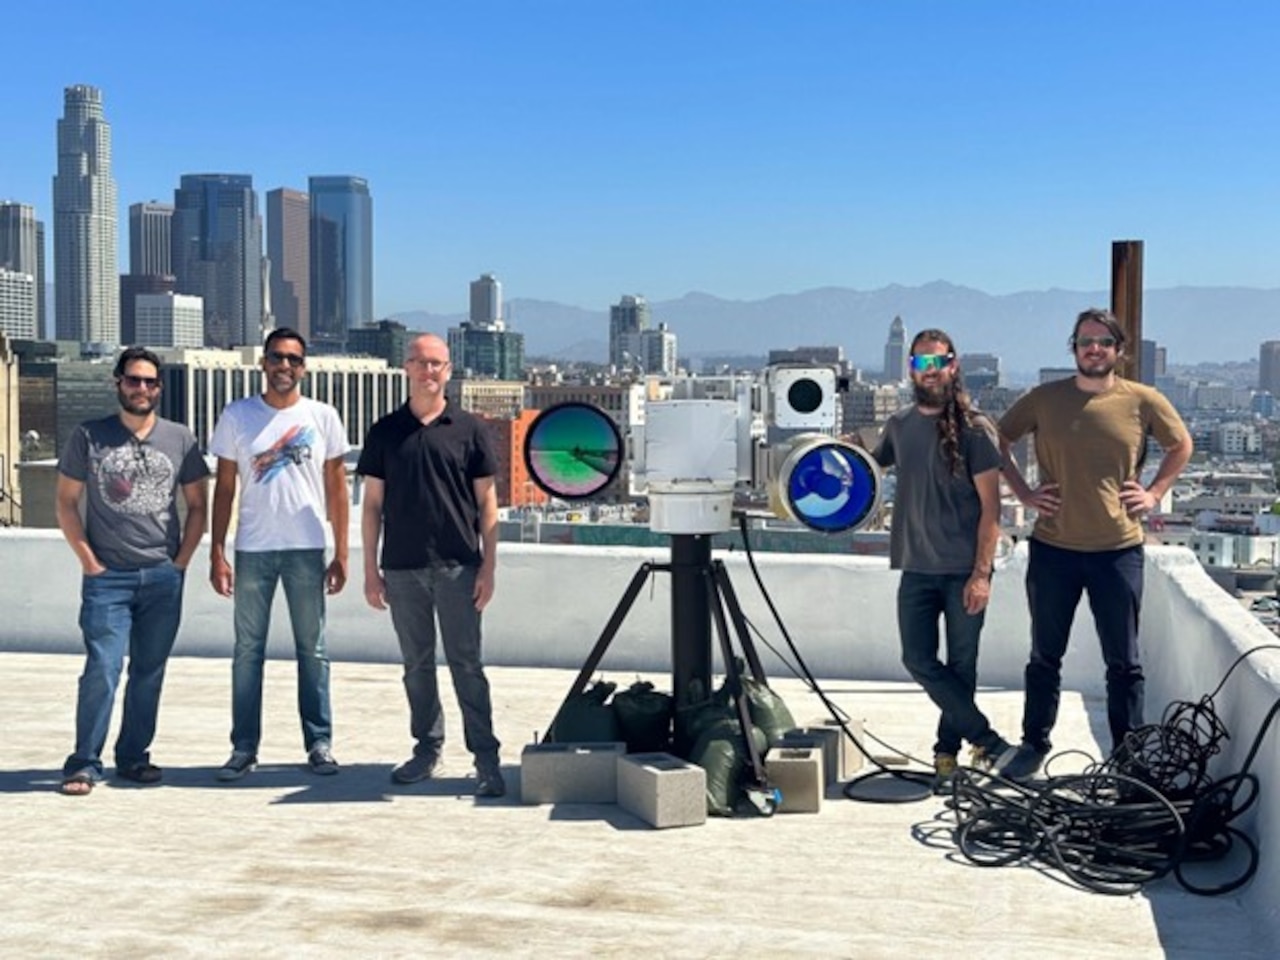 Five young men stand on a rooftop n either side of a piece of equipment. Tall buildings are in the background and mountains loom in the distance.